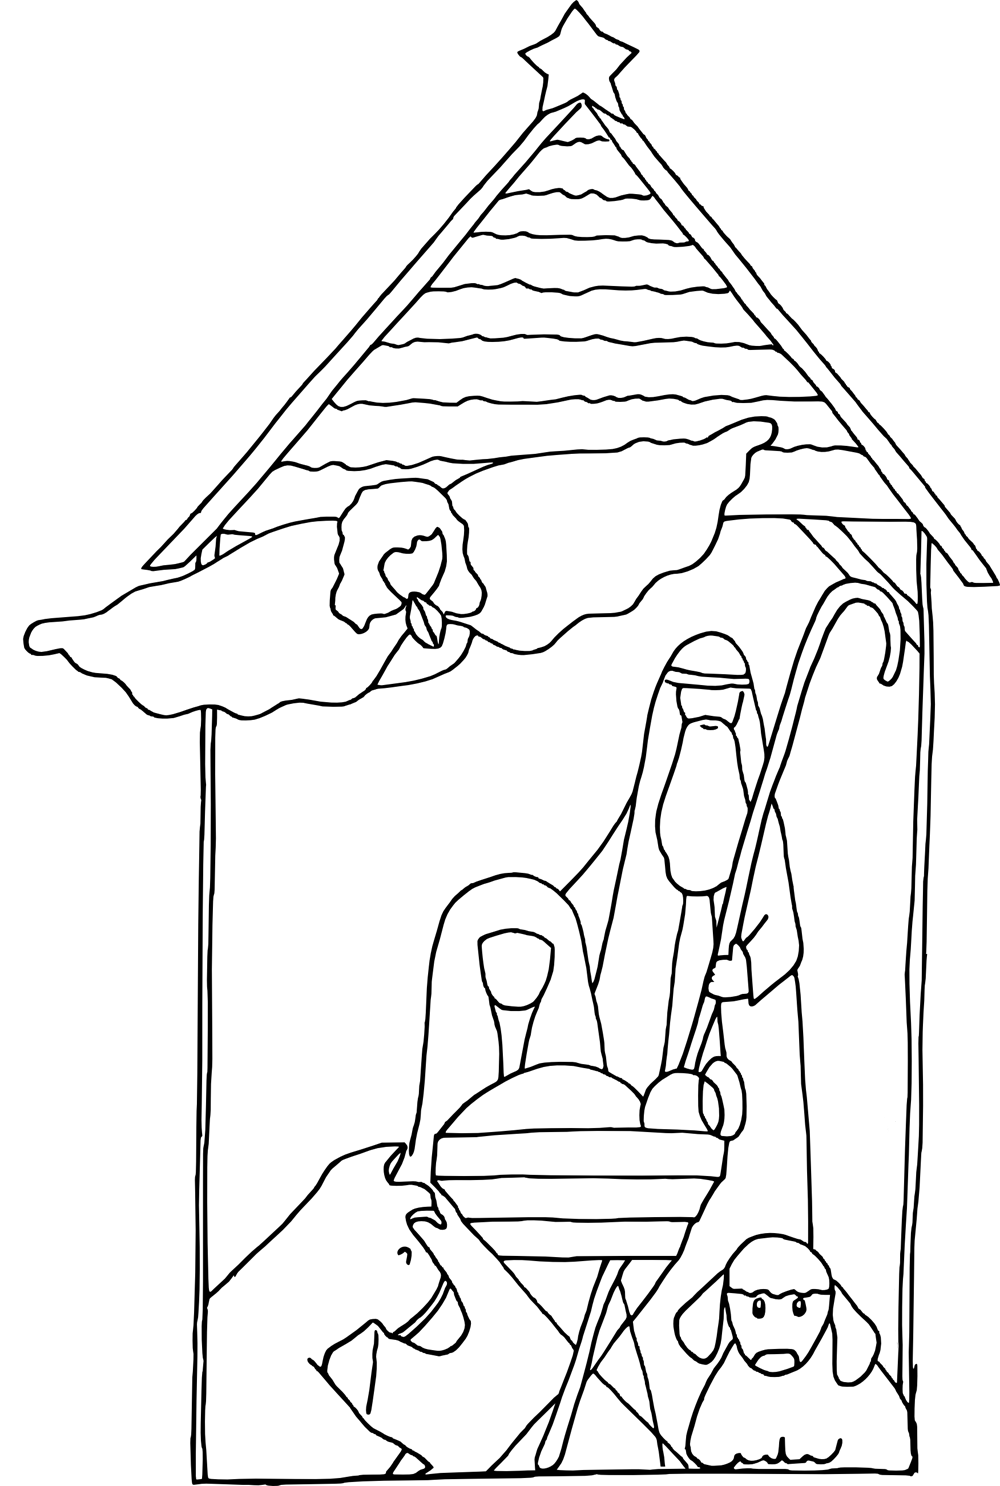 Printable Baby Jesus Coloring Page